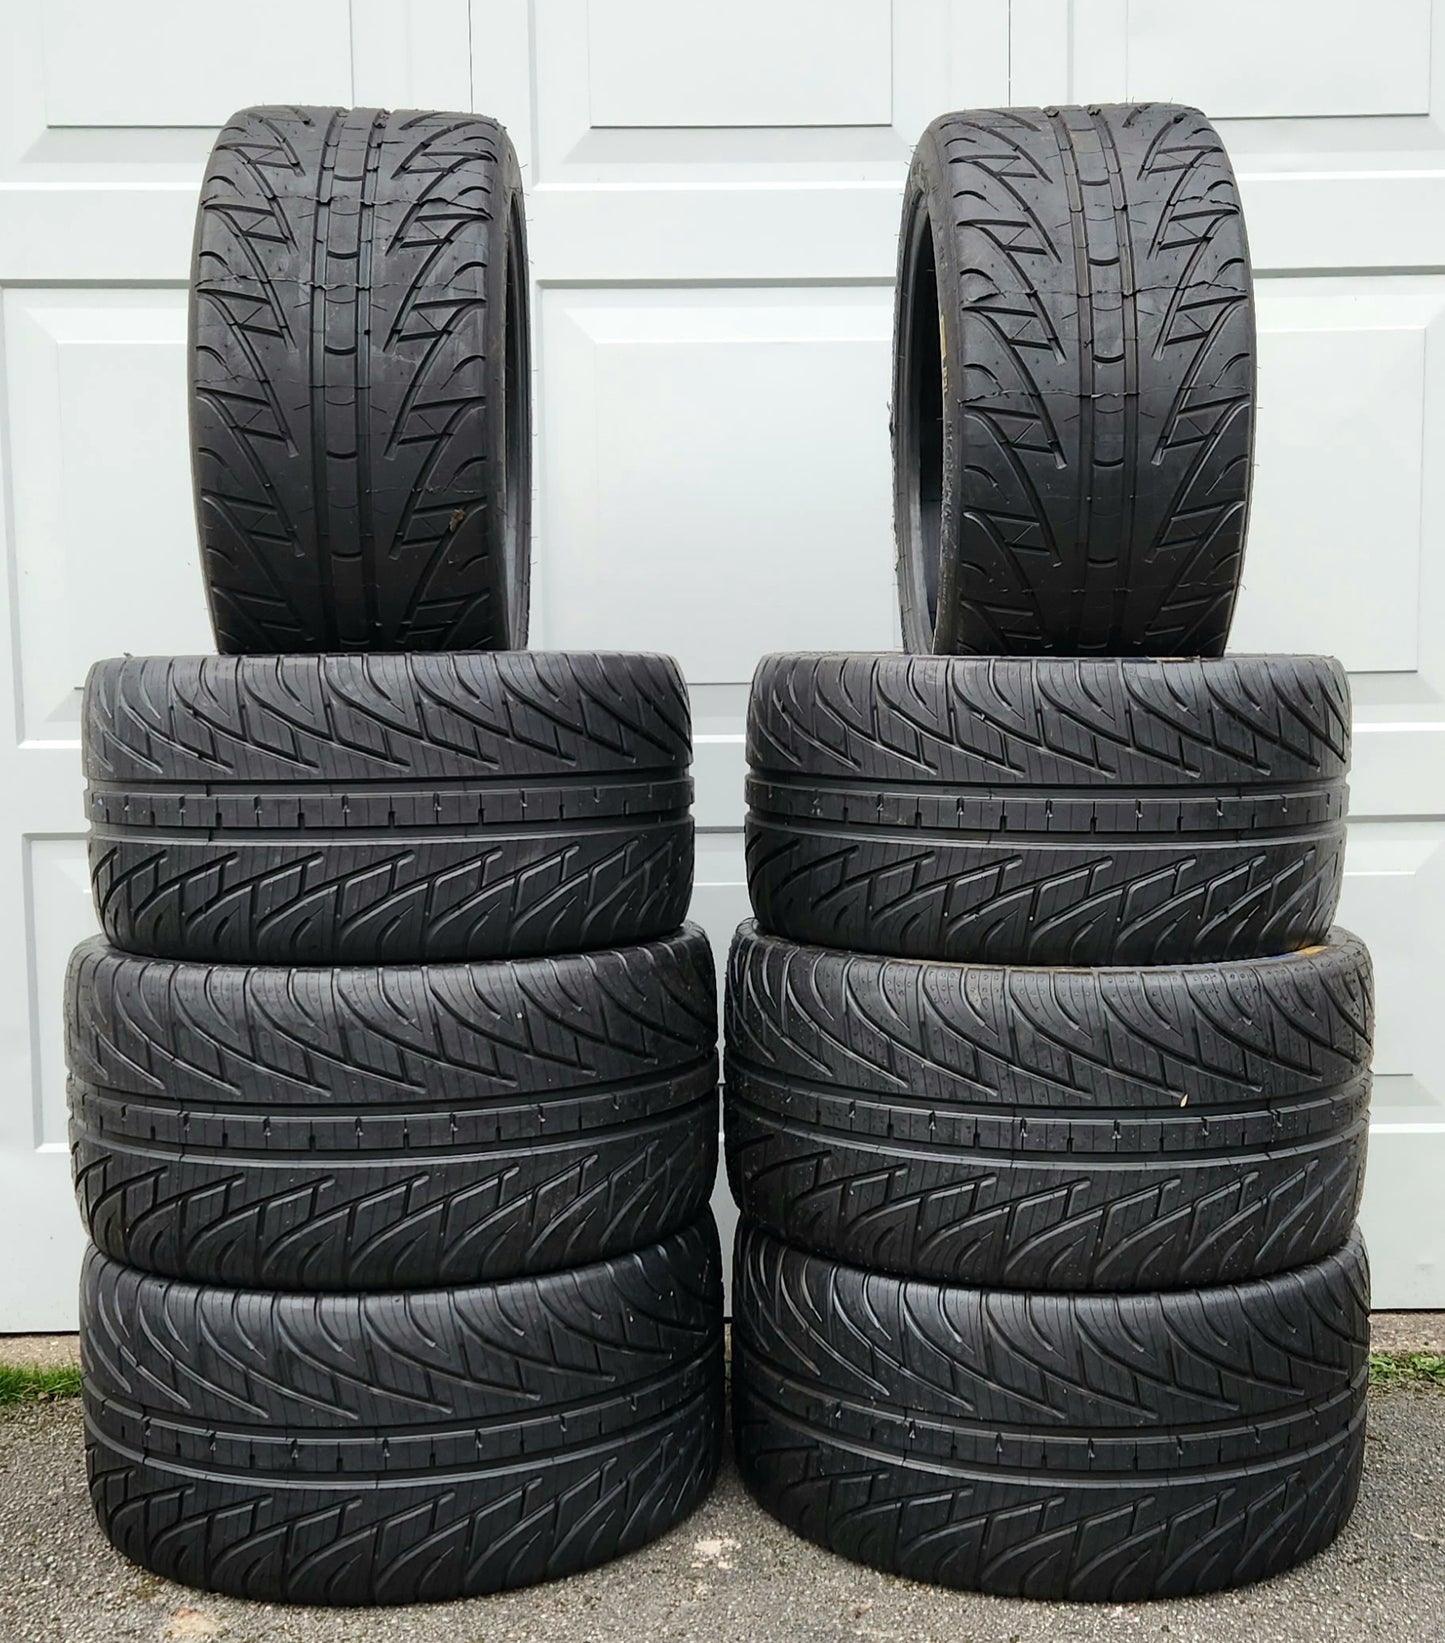 New Michelin 31/71/18 P2L Wets - PAIR